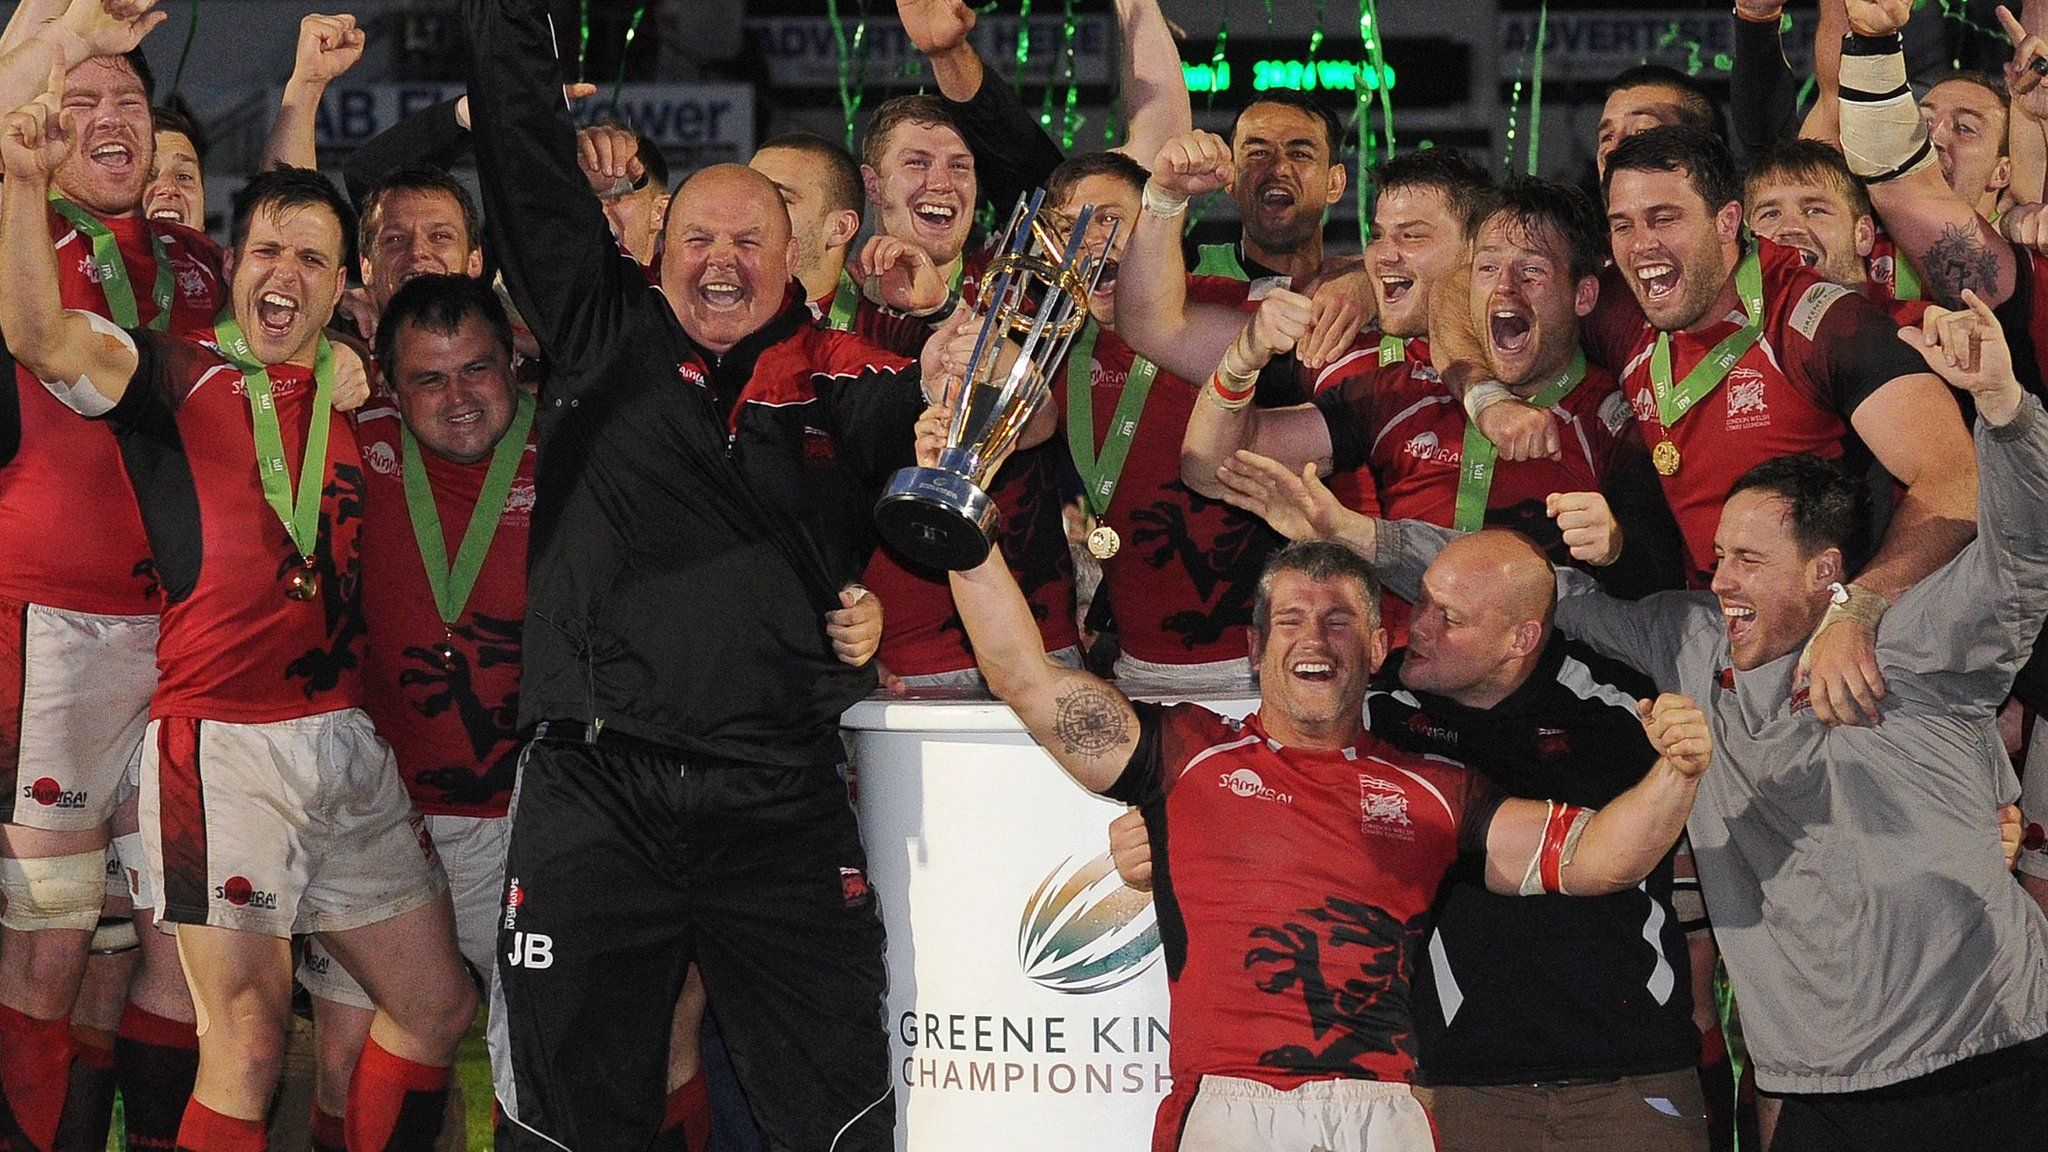 London Welsh Championship promotion in 2014